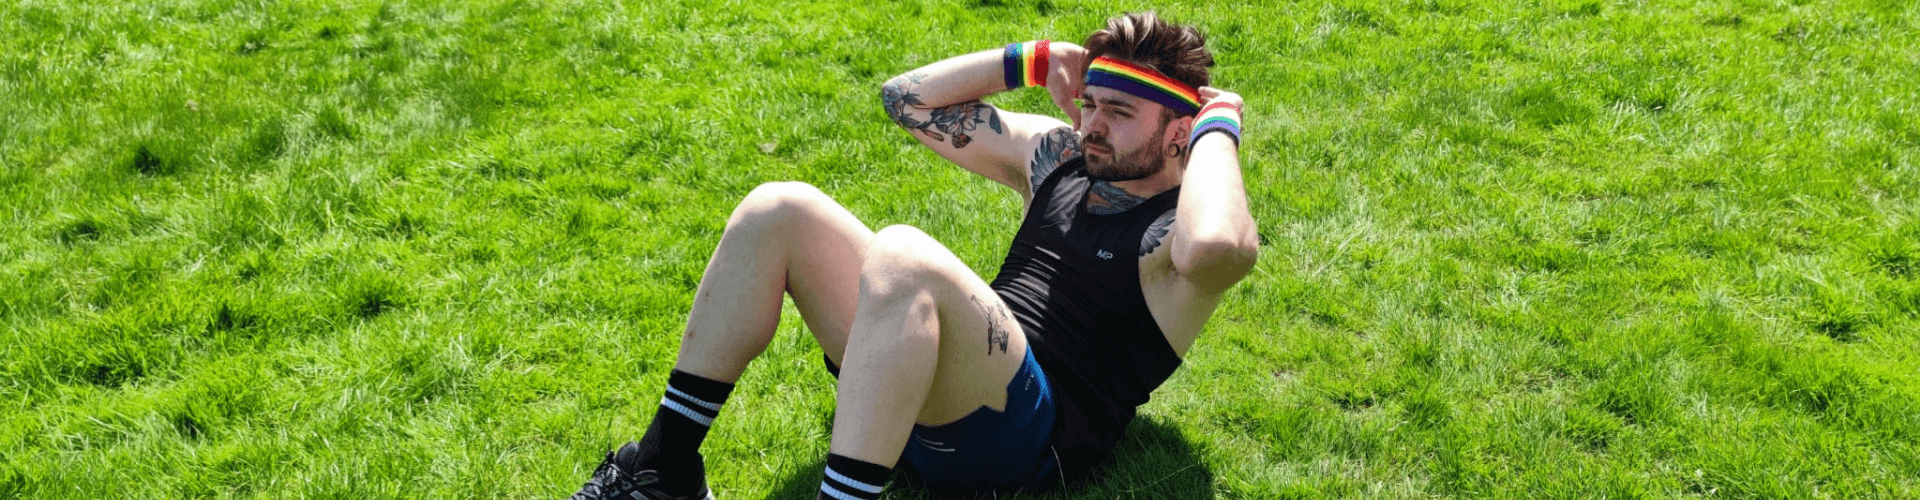 A white person doing sit ups on a field, wearing a rainbow headband